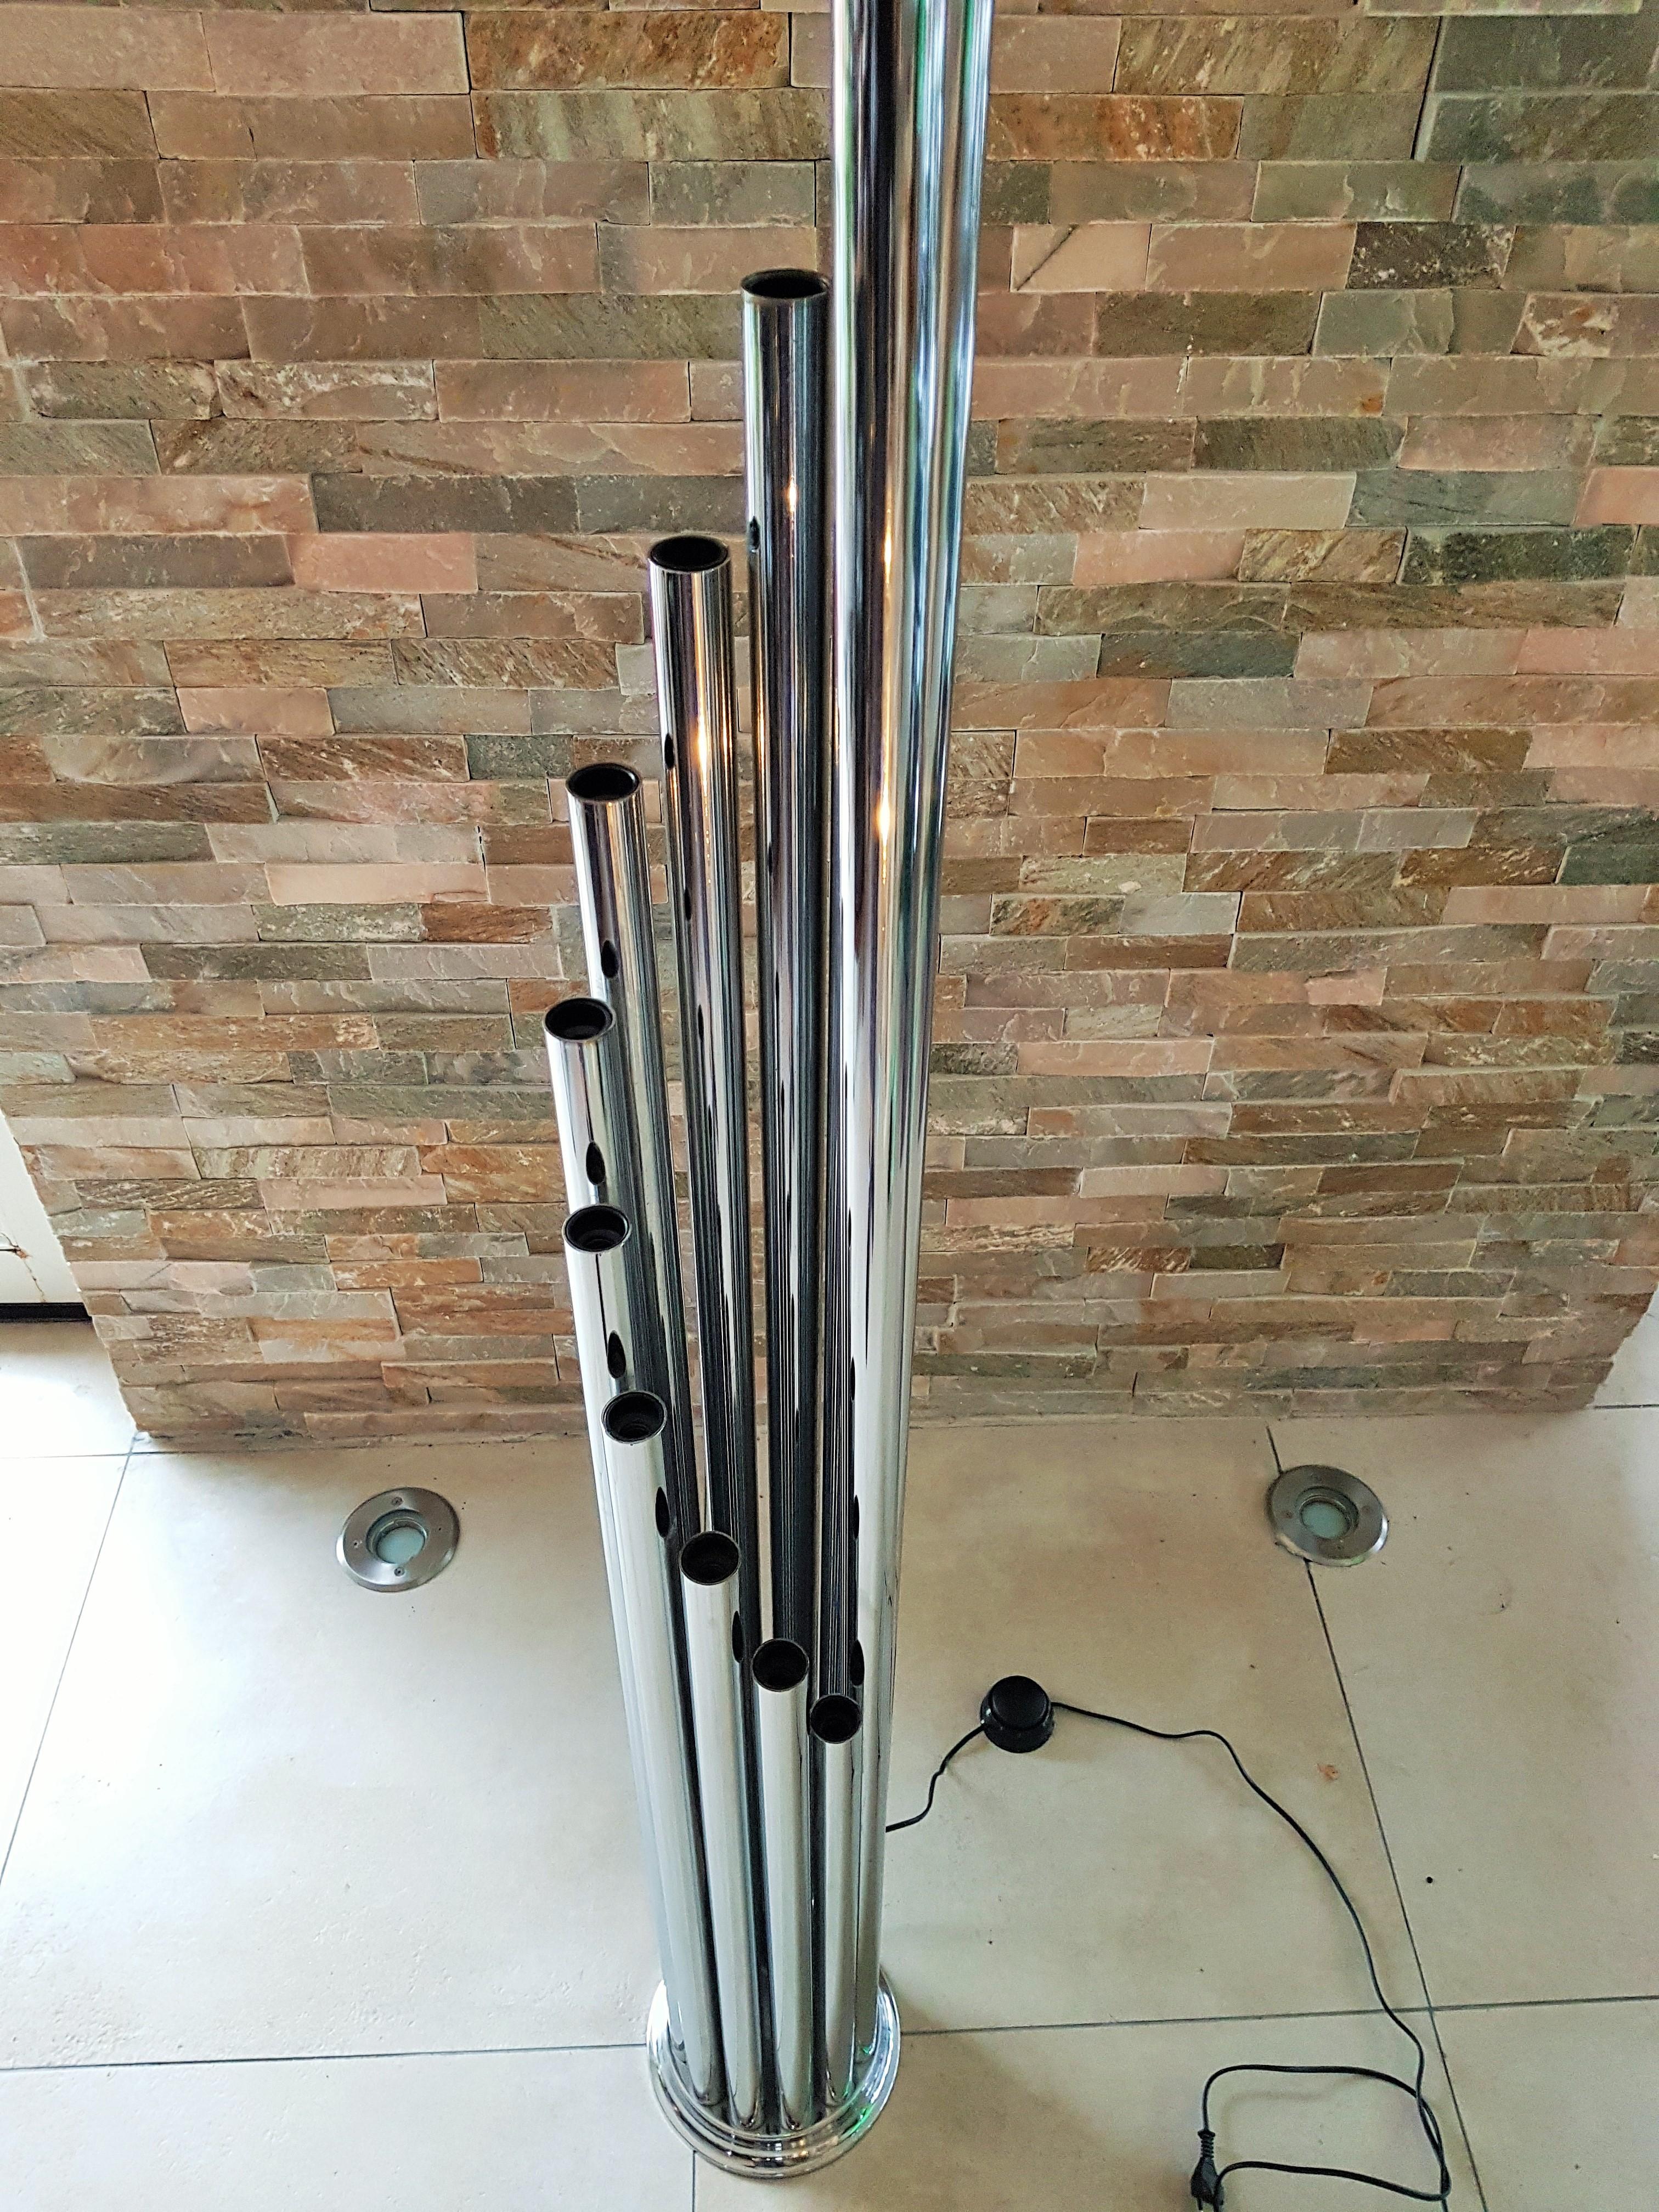 1960s Goffredo Reggiani floor lamp. Array of ascending tubular lights spiralling from a round plinth like organ pipes. Chrome in good condition. Fully rewired, all cables new. Footswitch.

 